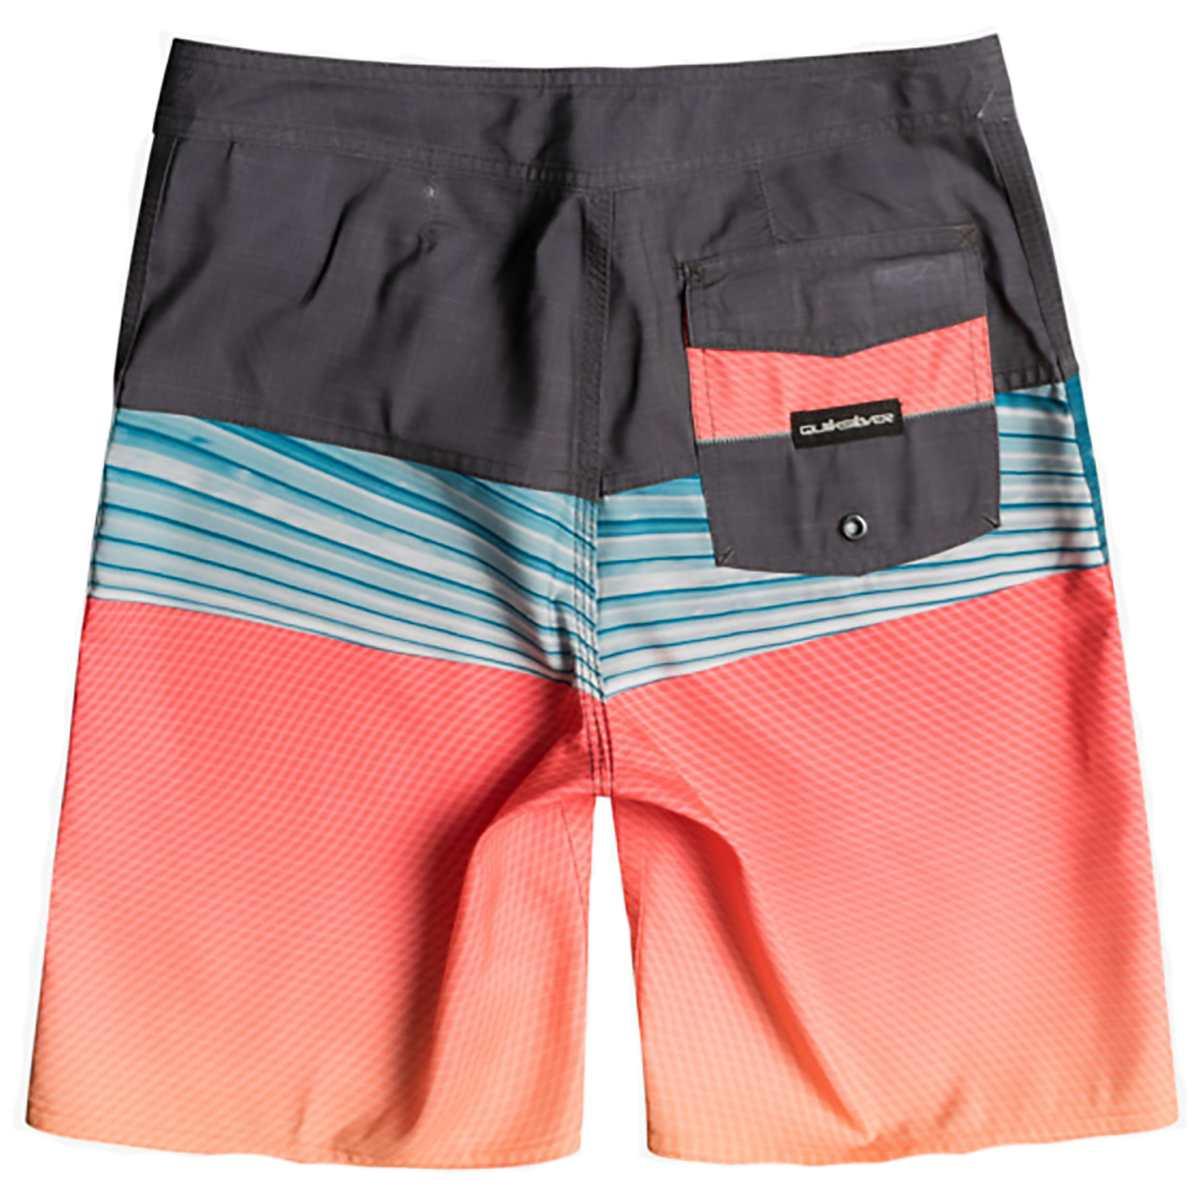 Boardshort QS Everyday Panel 17 Youth QUIKSILVER